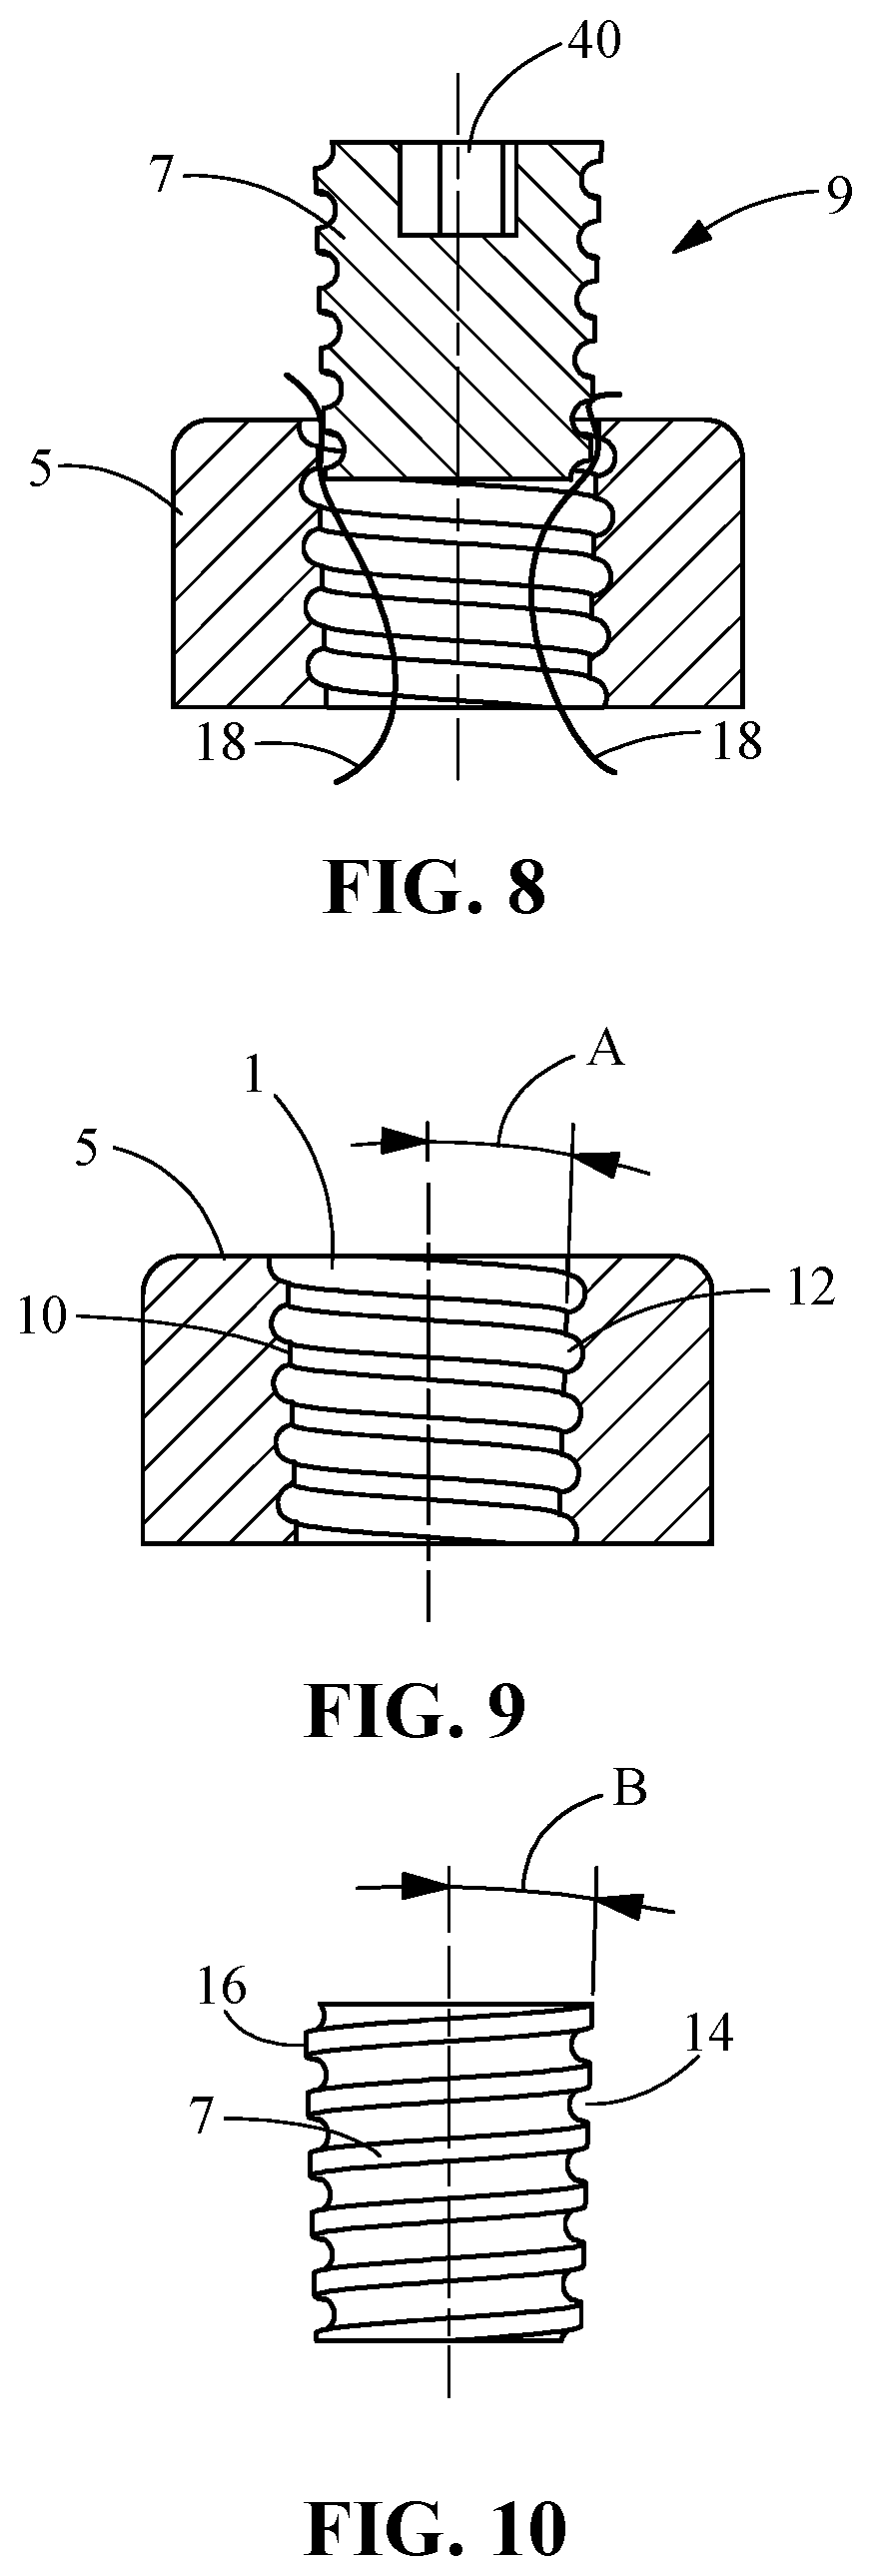 Suture tensioning and securement device, system, and methods